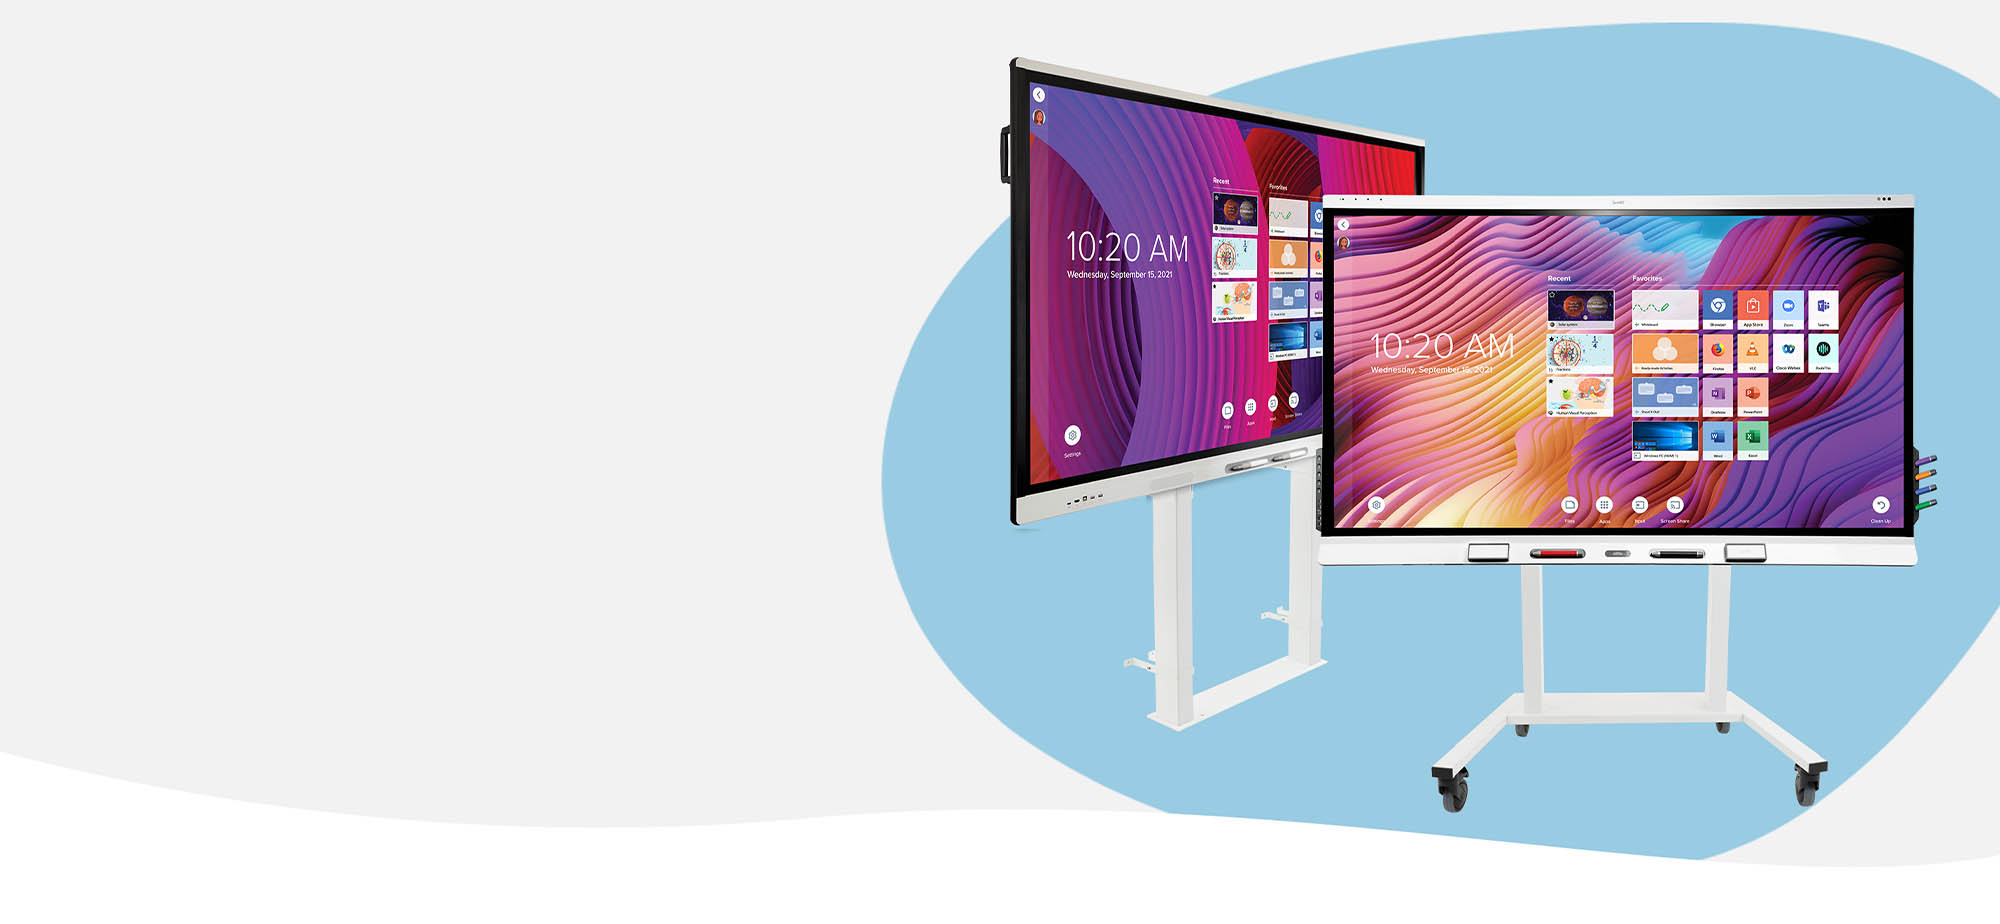 Two SMART Board interactive displays mounted on SMART Electric Height-Adjustable Stands, showcasing their versatility and adaptability for different learning environments.